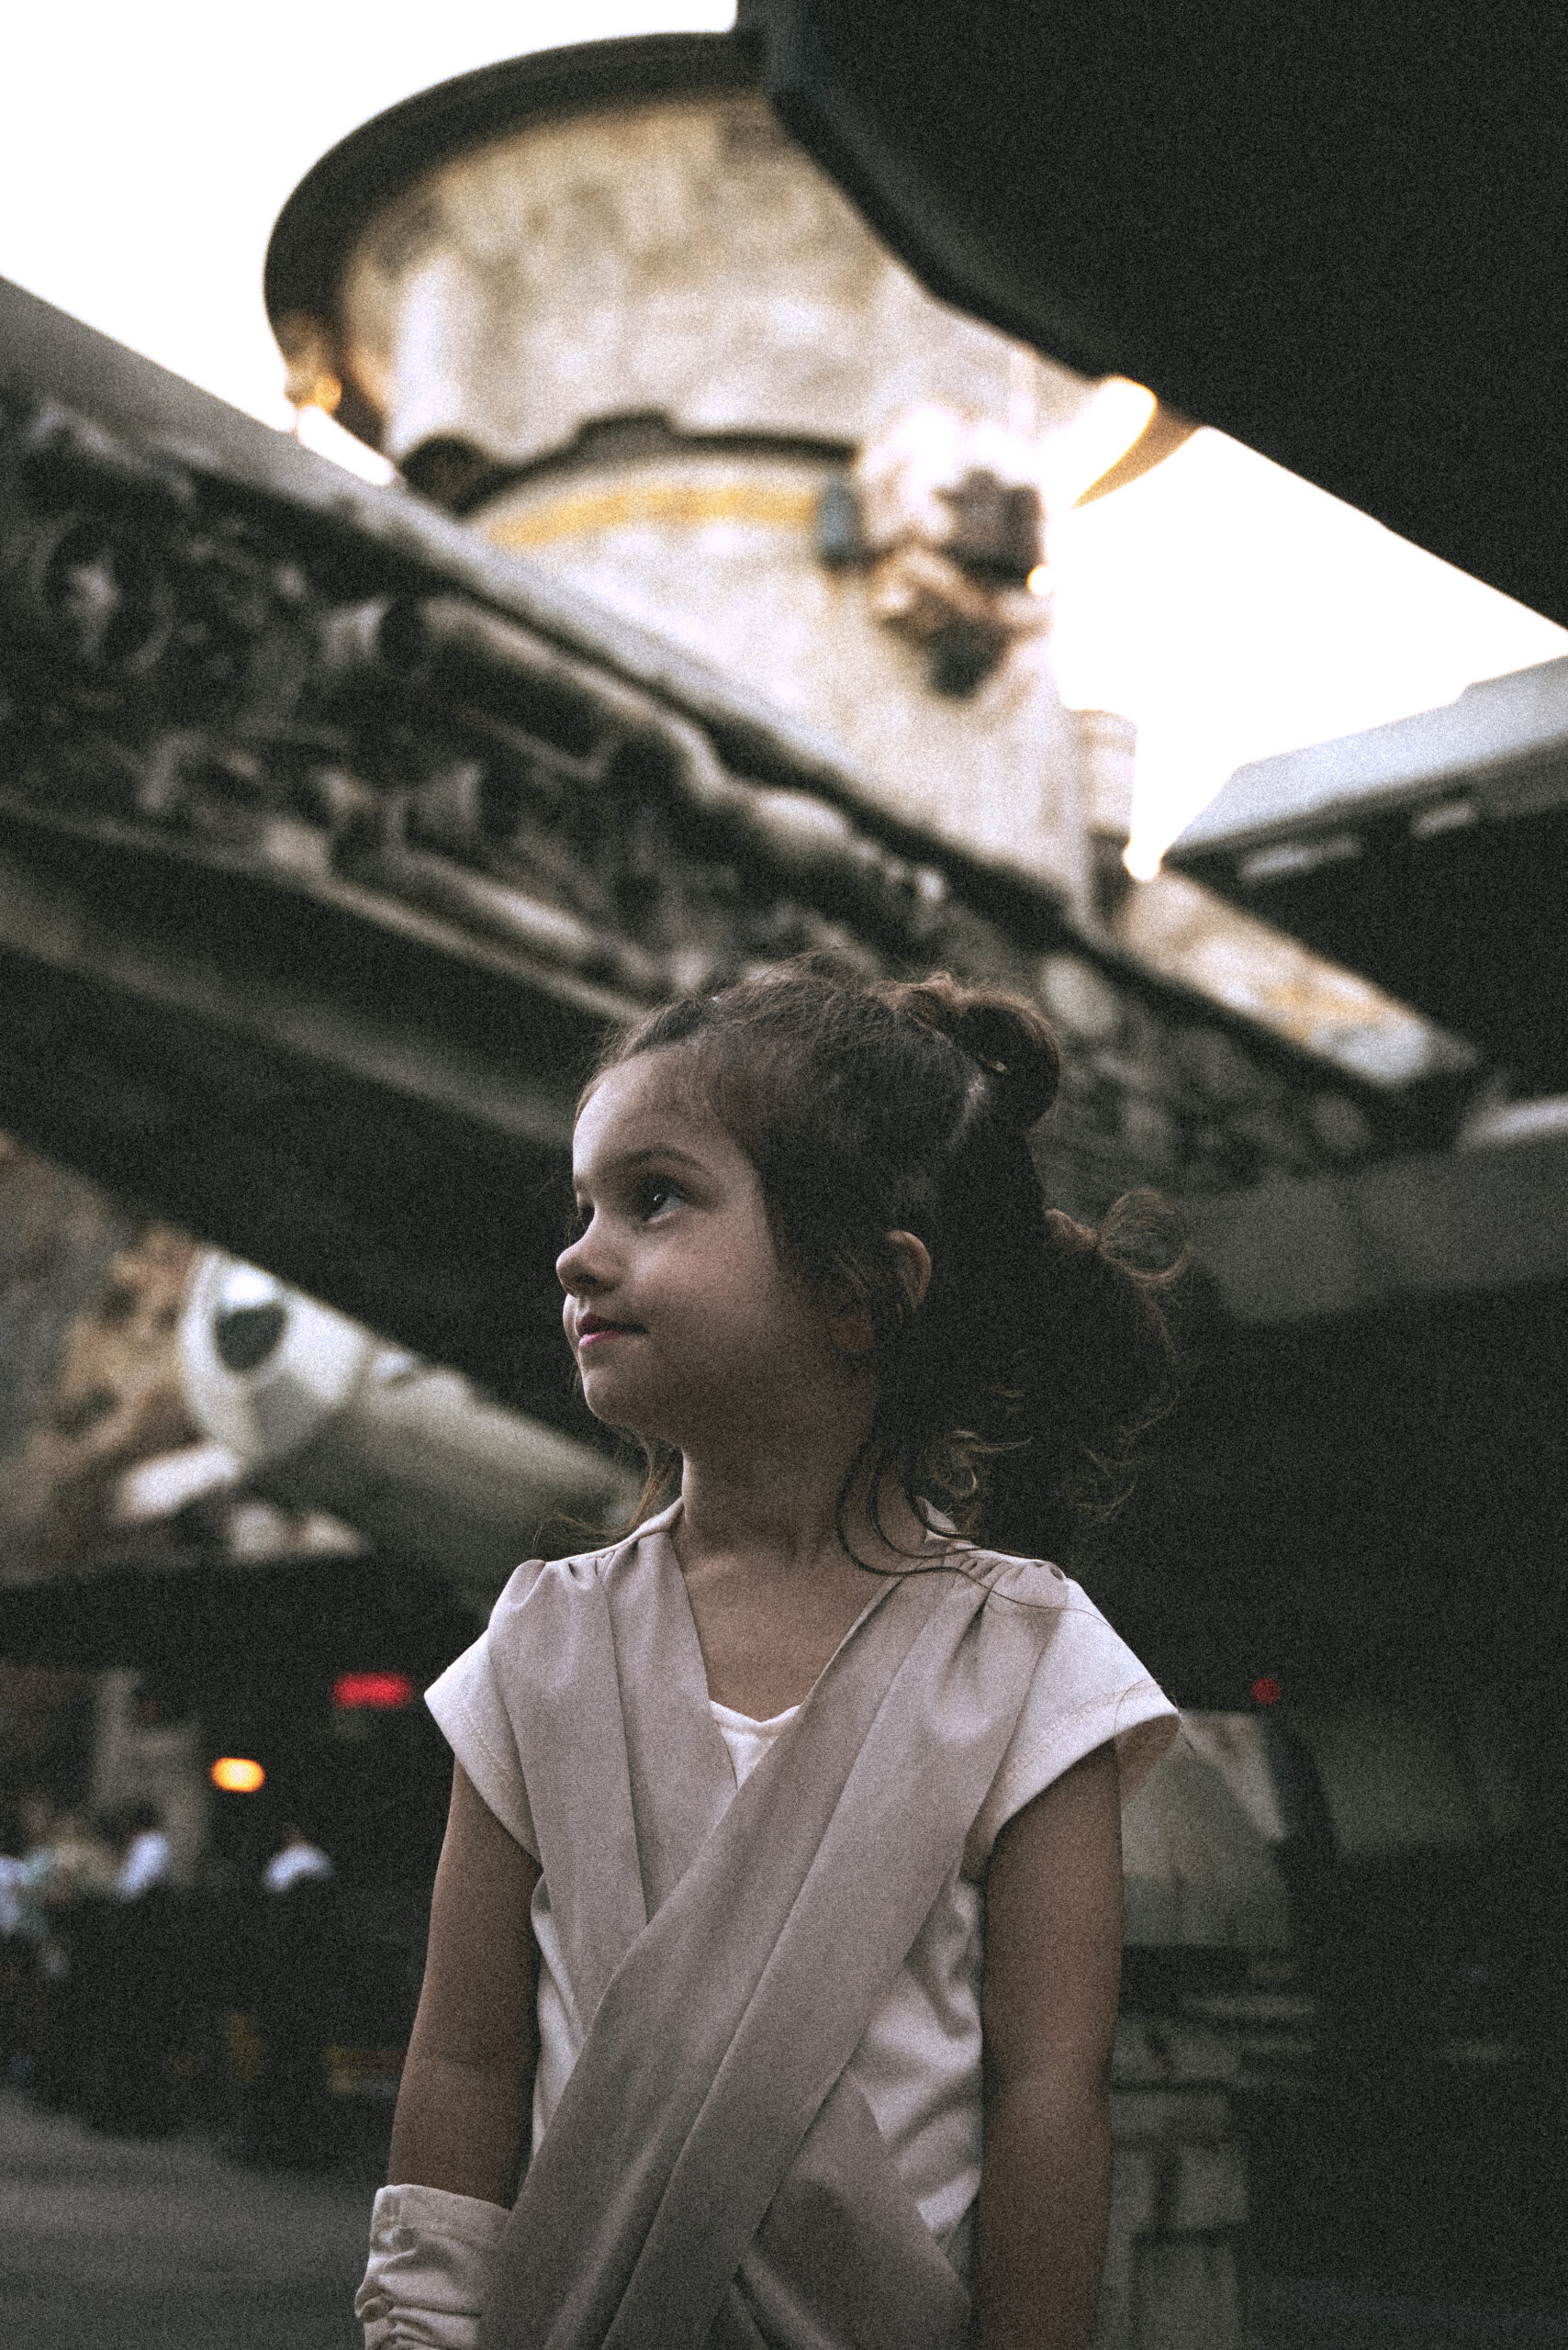 A young girl dressed as Rey from Star Wars in Star Wars Land at Disneyland in Anaheim, California